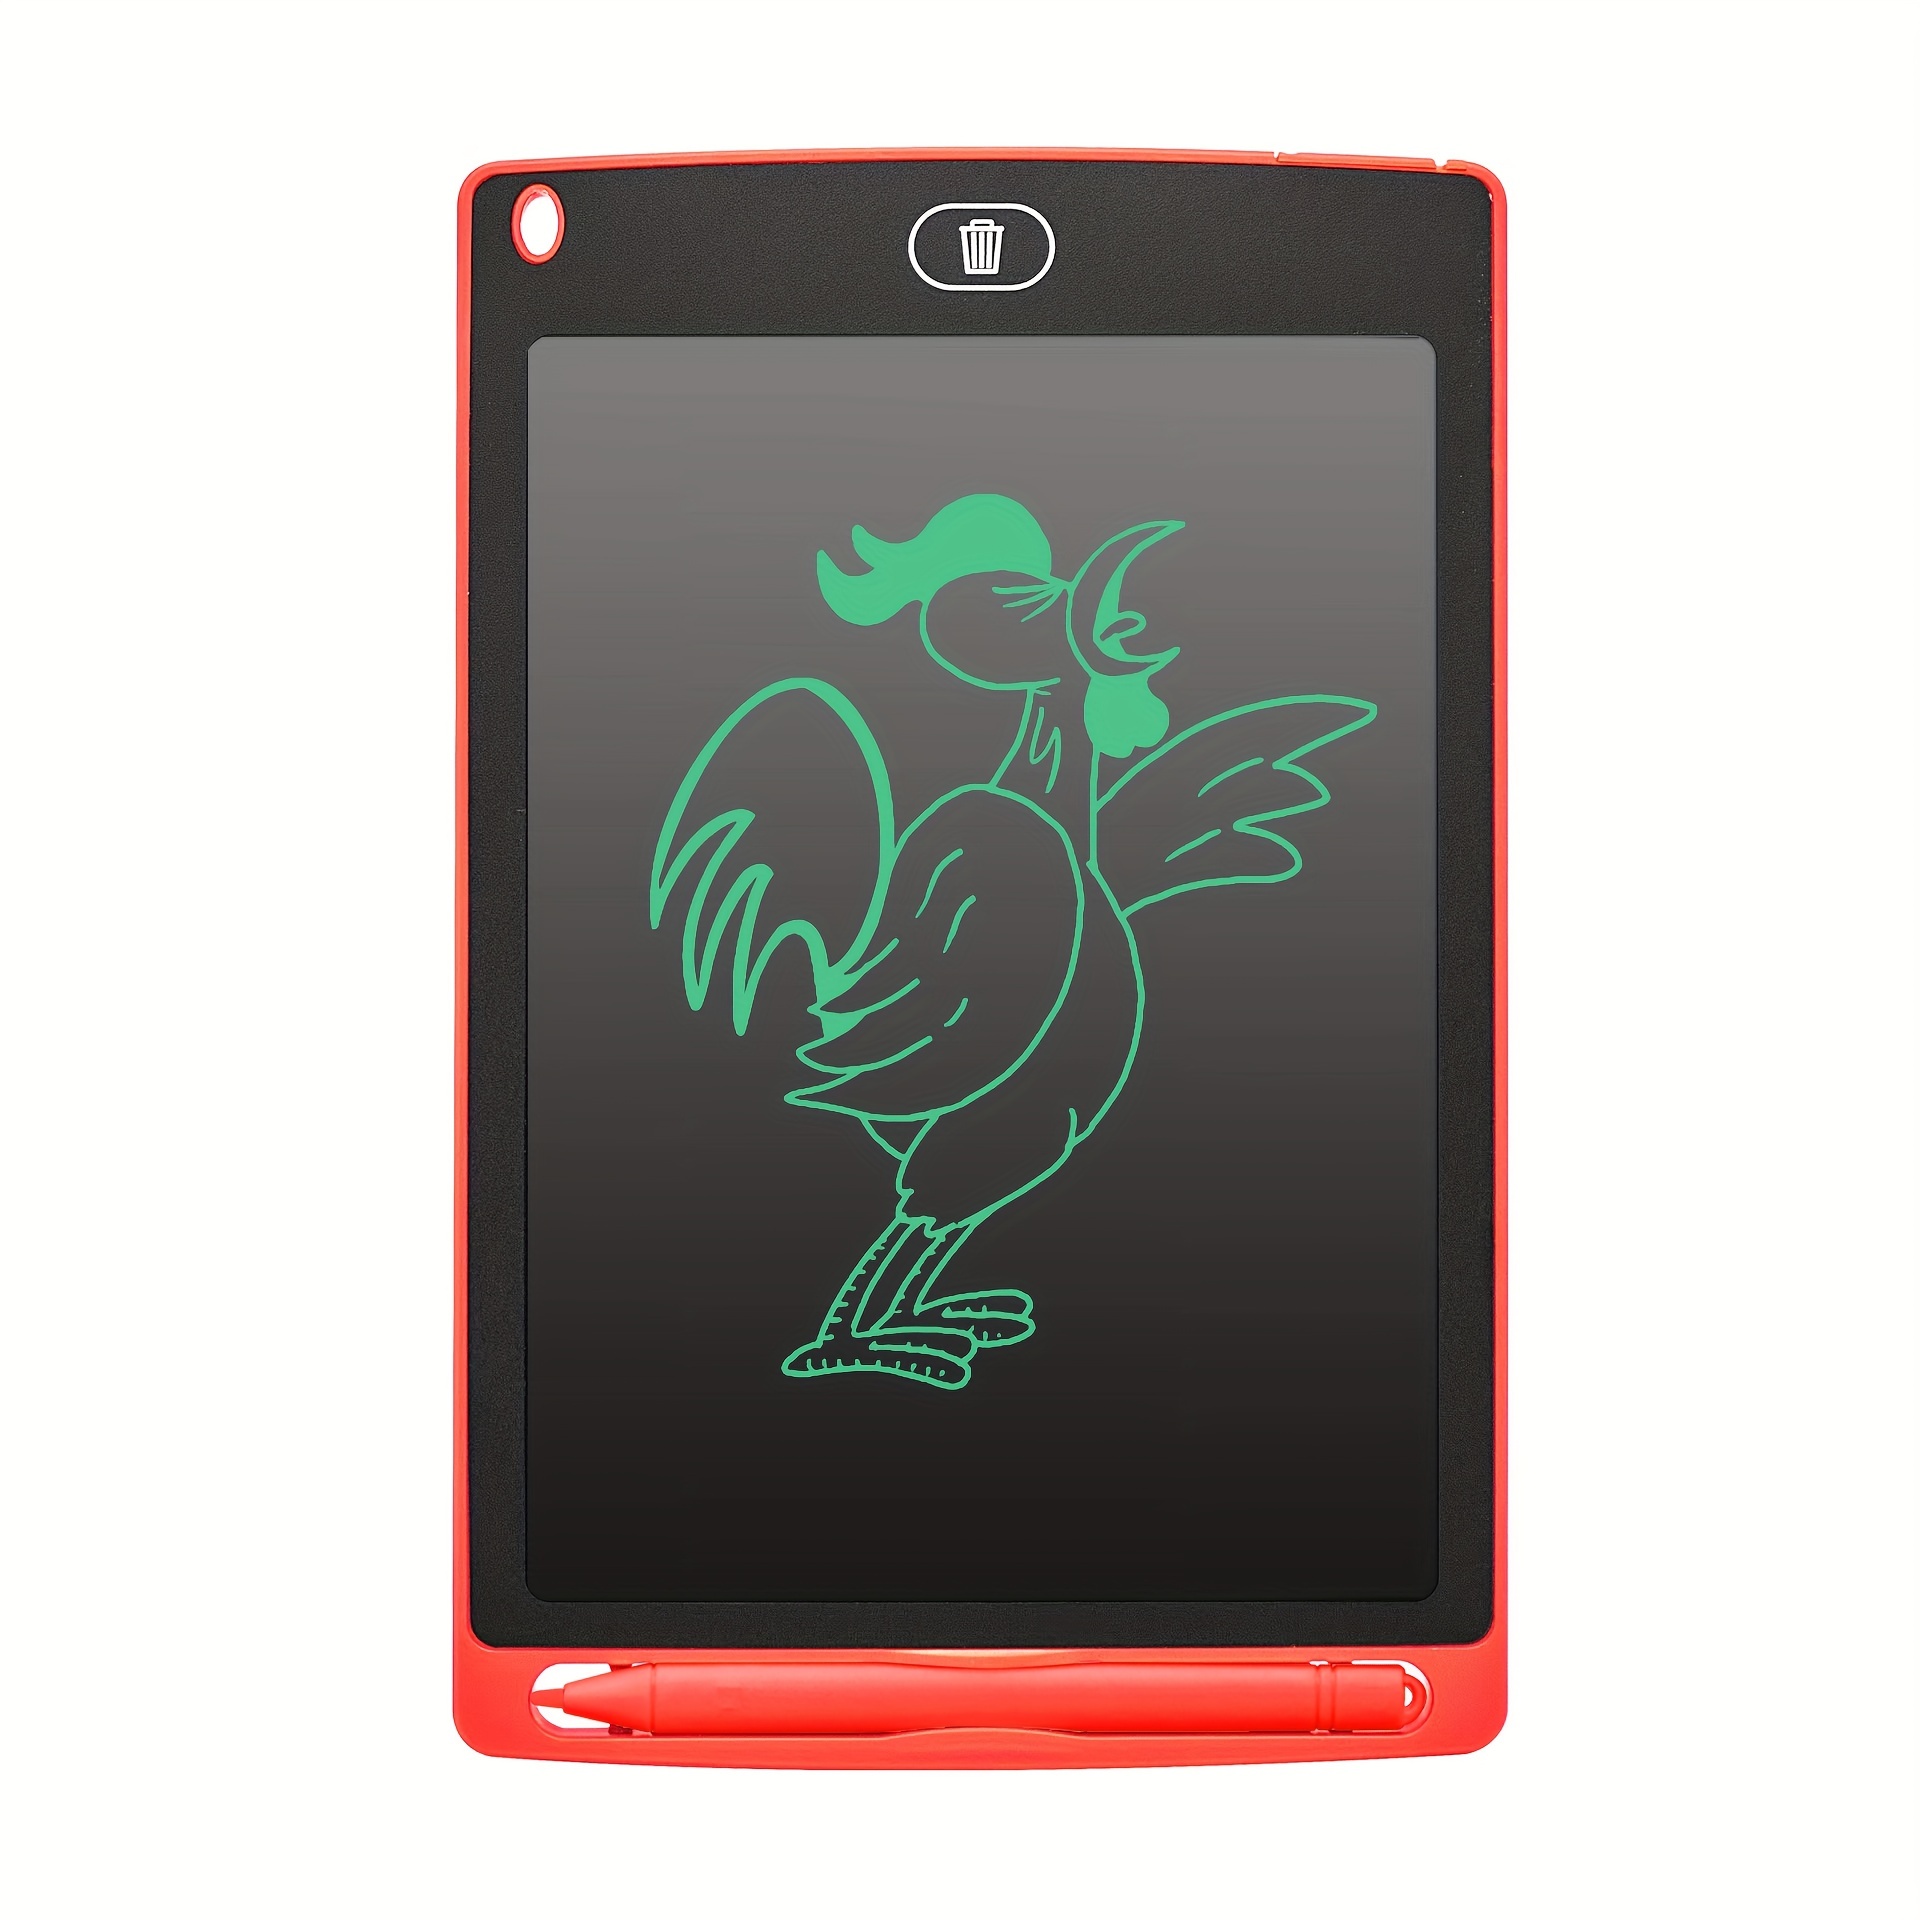 8.5 inch Doodle Pad Drawing Board LCD Writing Tablet with Delete Button for Kids, Red